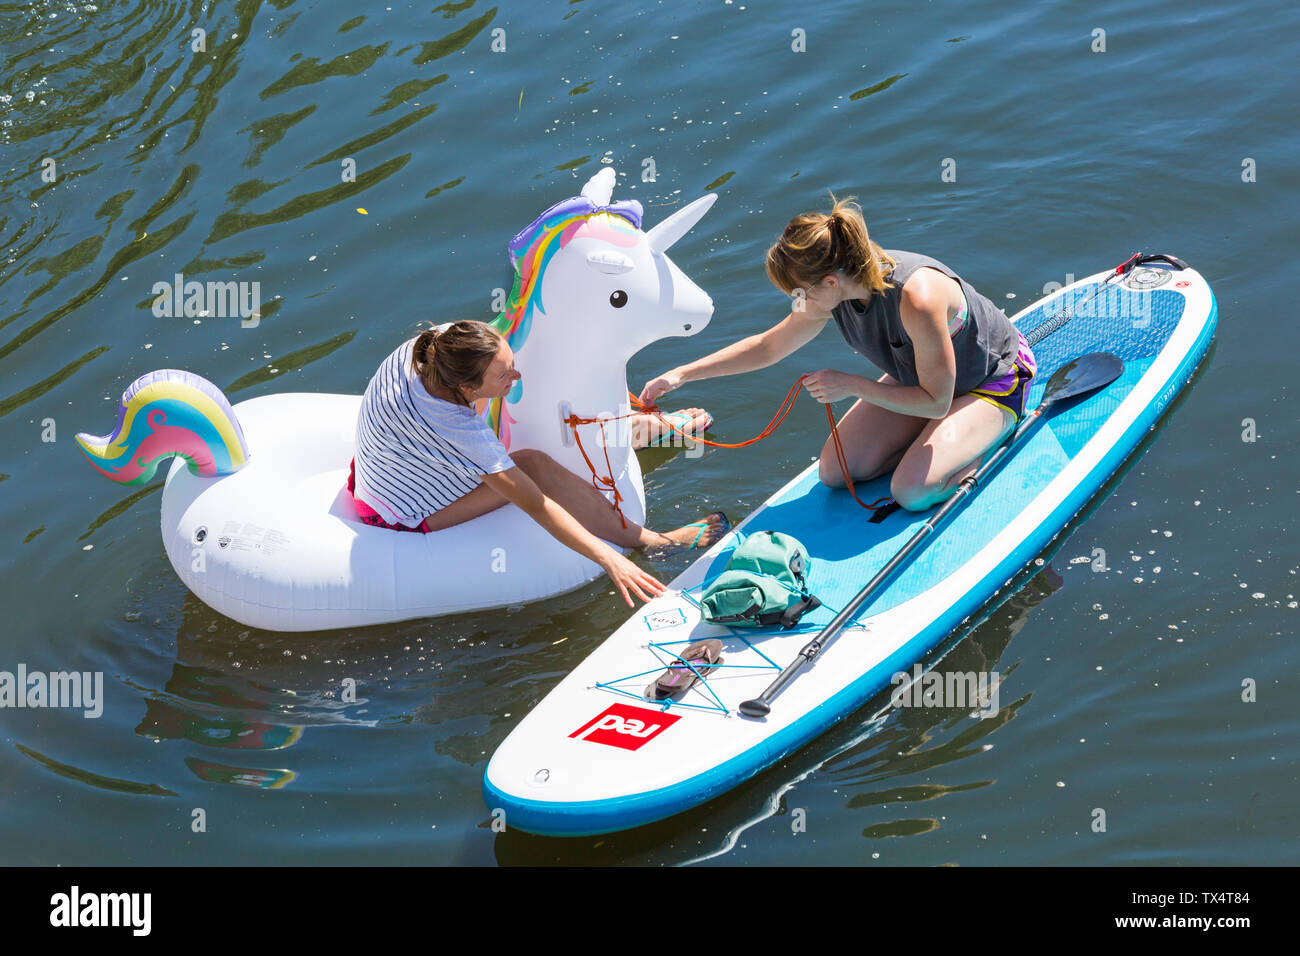 Woman paddleboarder paddle boarder and inflatable unicorn inflatable having fun on Dorset Dinghy Day at River Stour, Iford, Dorset UK in June Stock Photo